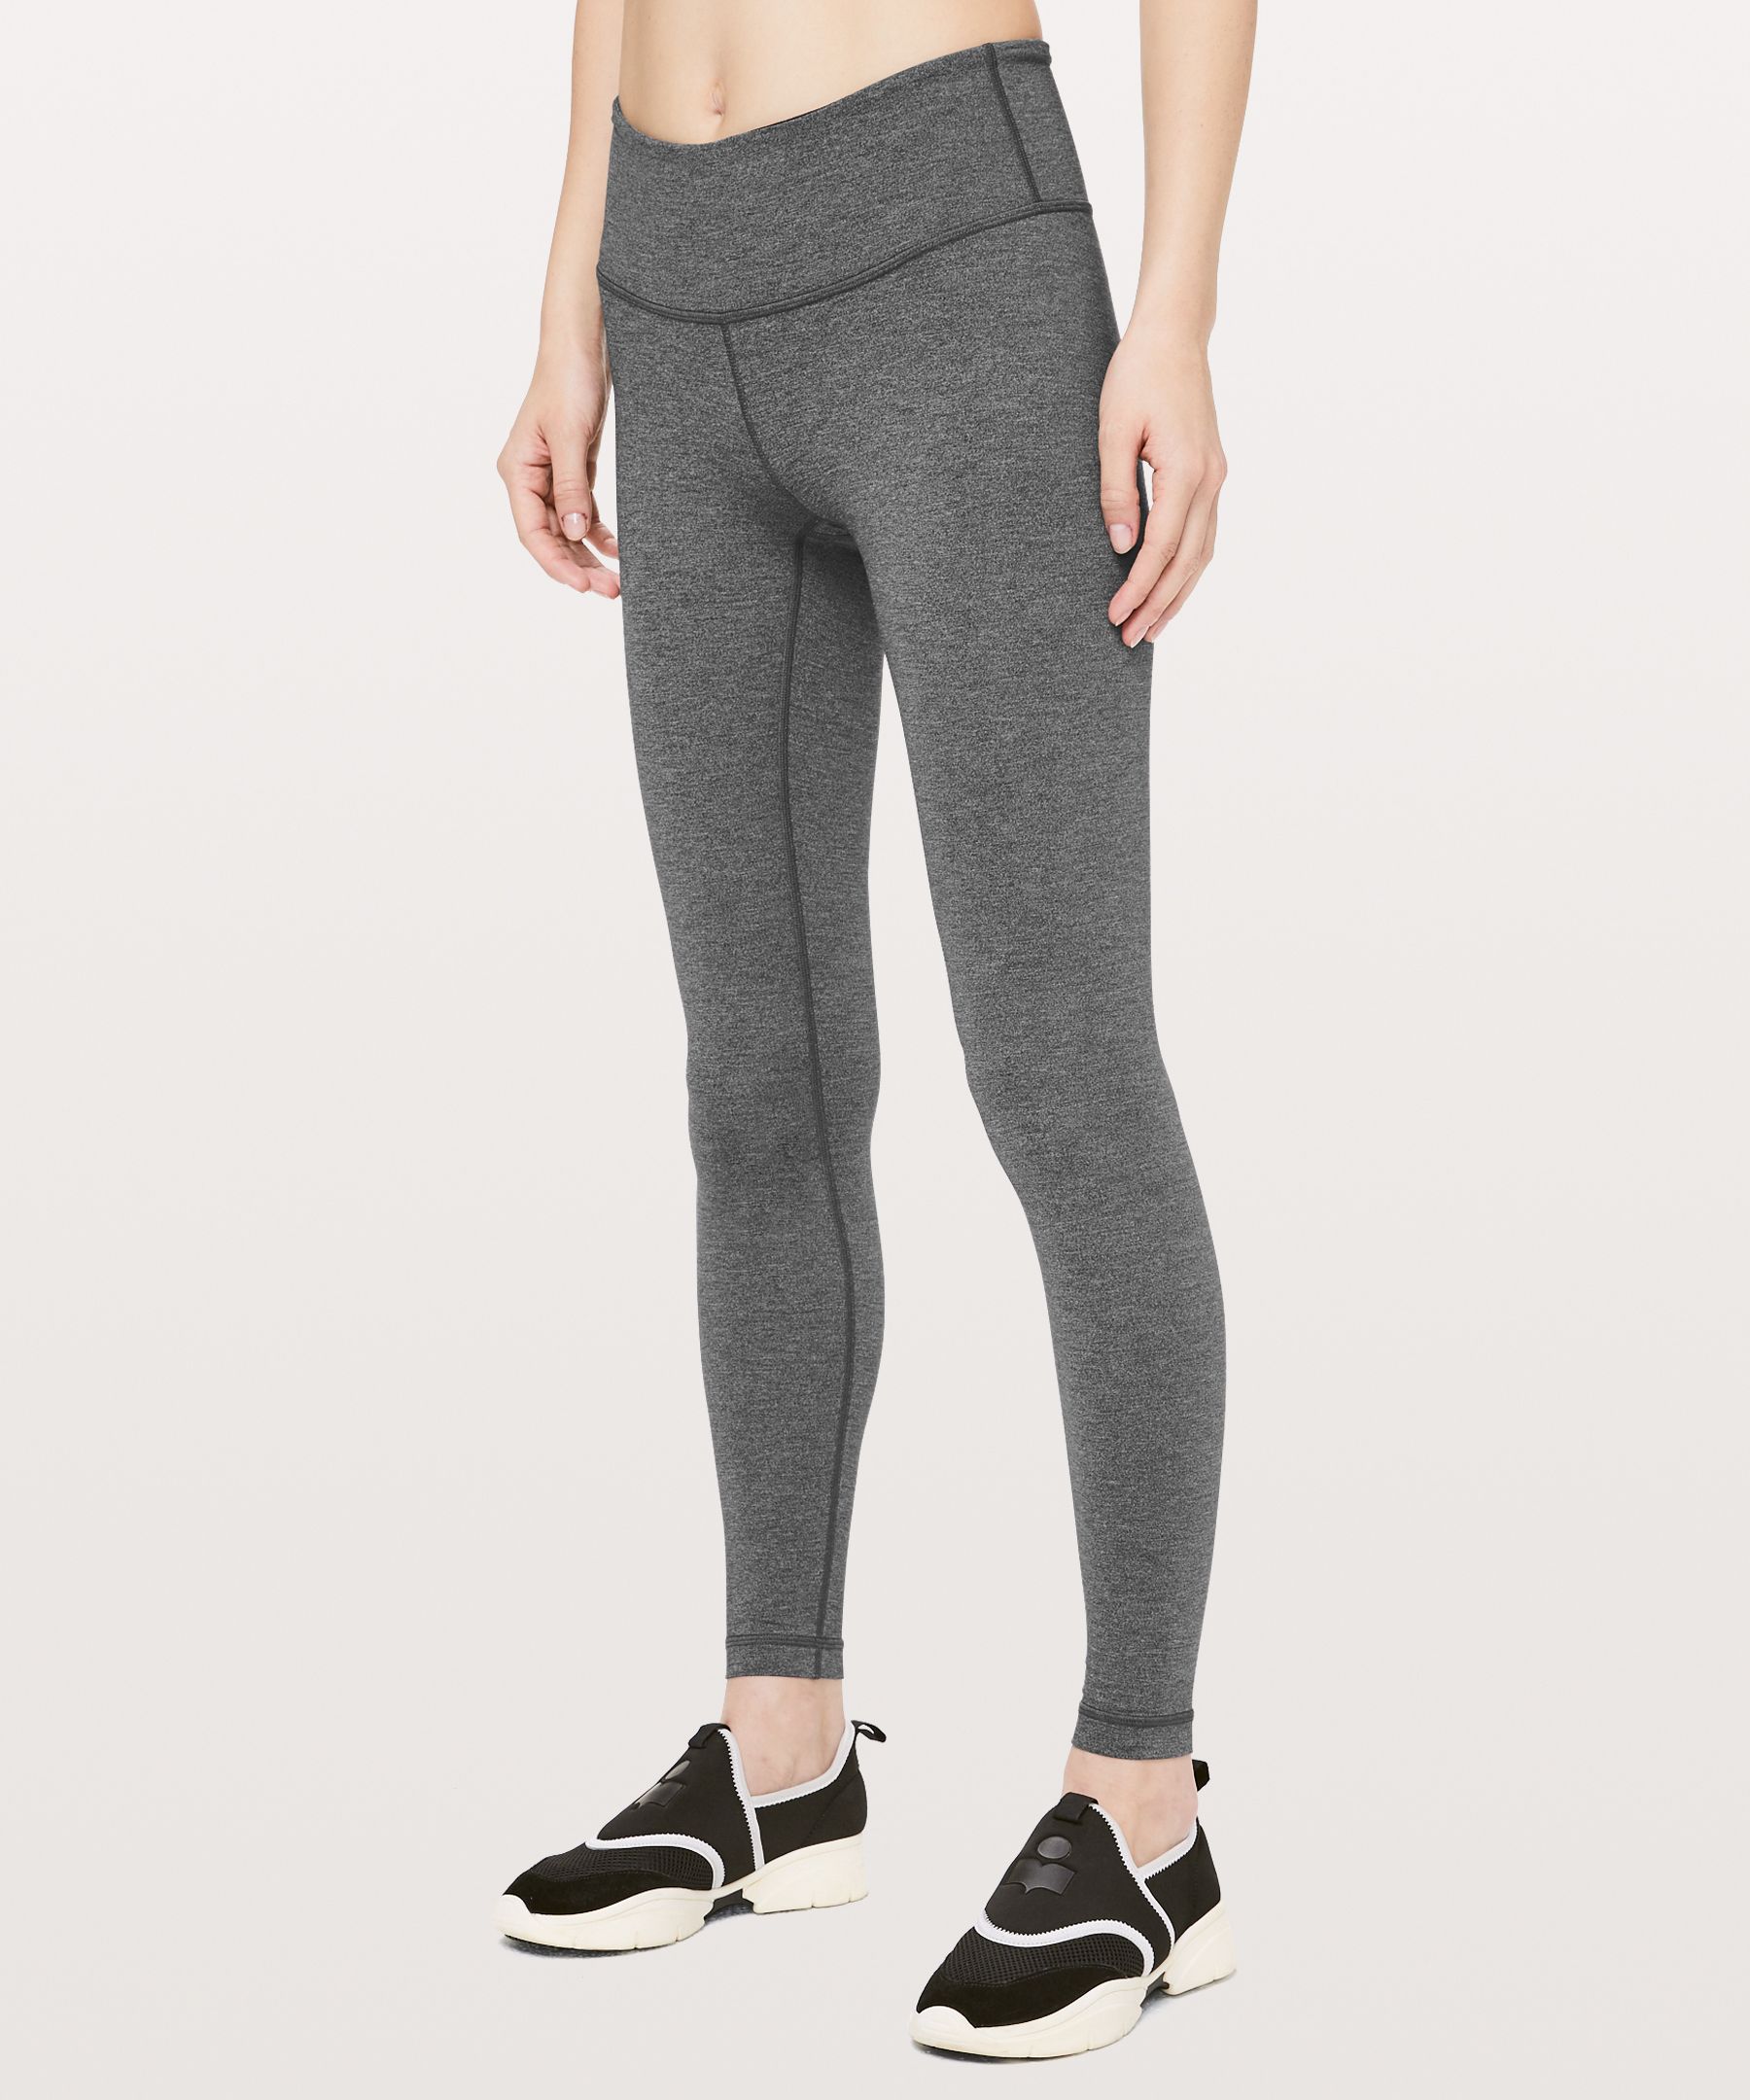 Lululemon Wunder Under Low-rise Tight *luxtreme 28" In Black